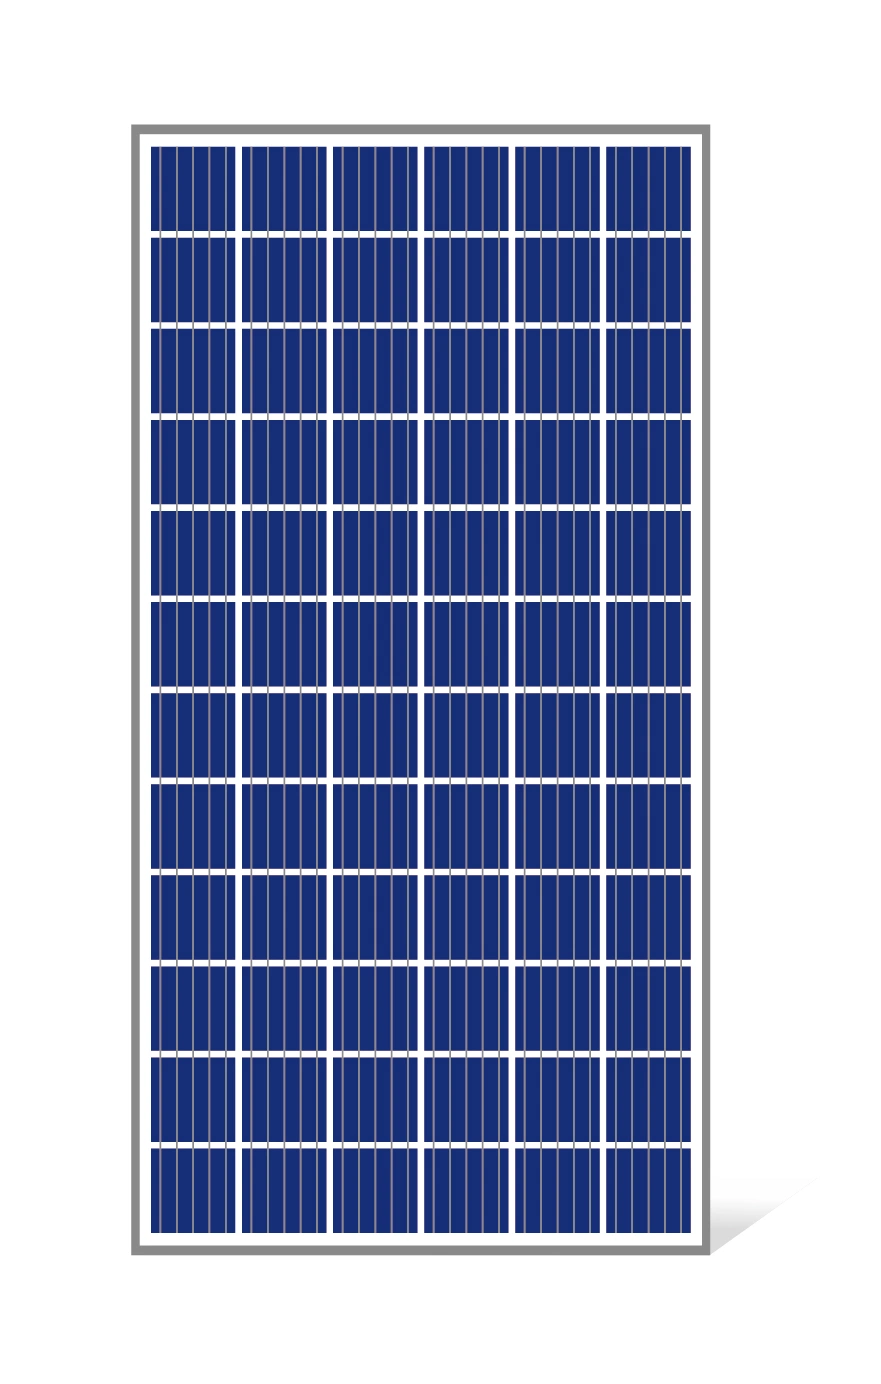 Hot Sale 350W Poly Sells Solar Electricity Panels for Your Home